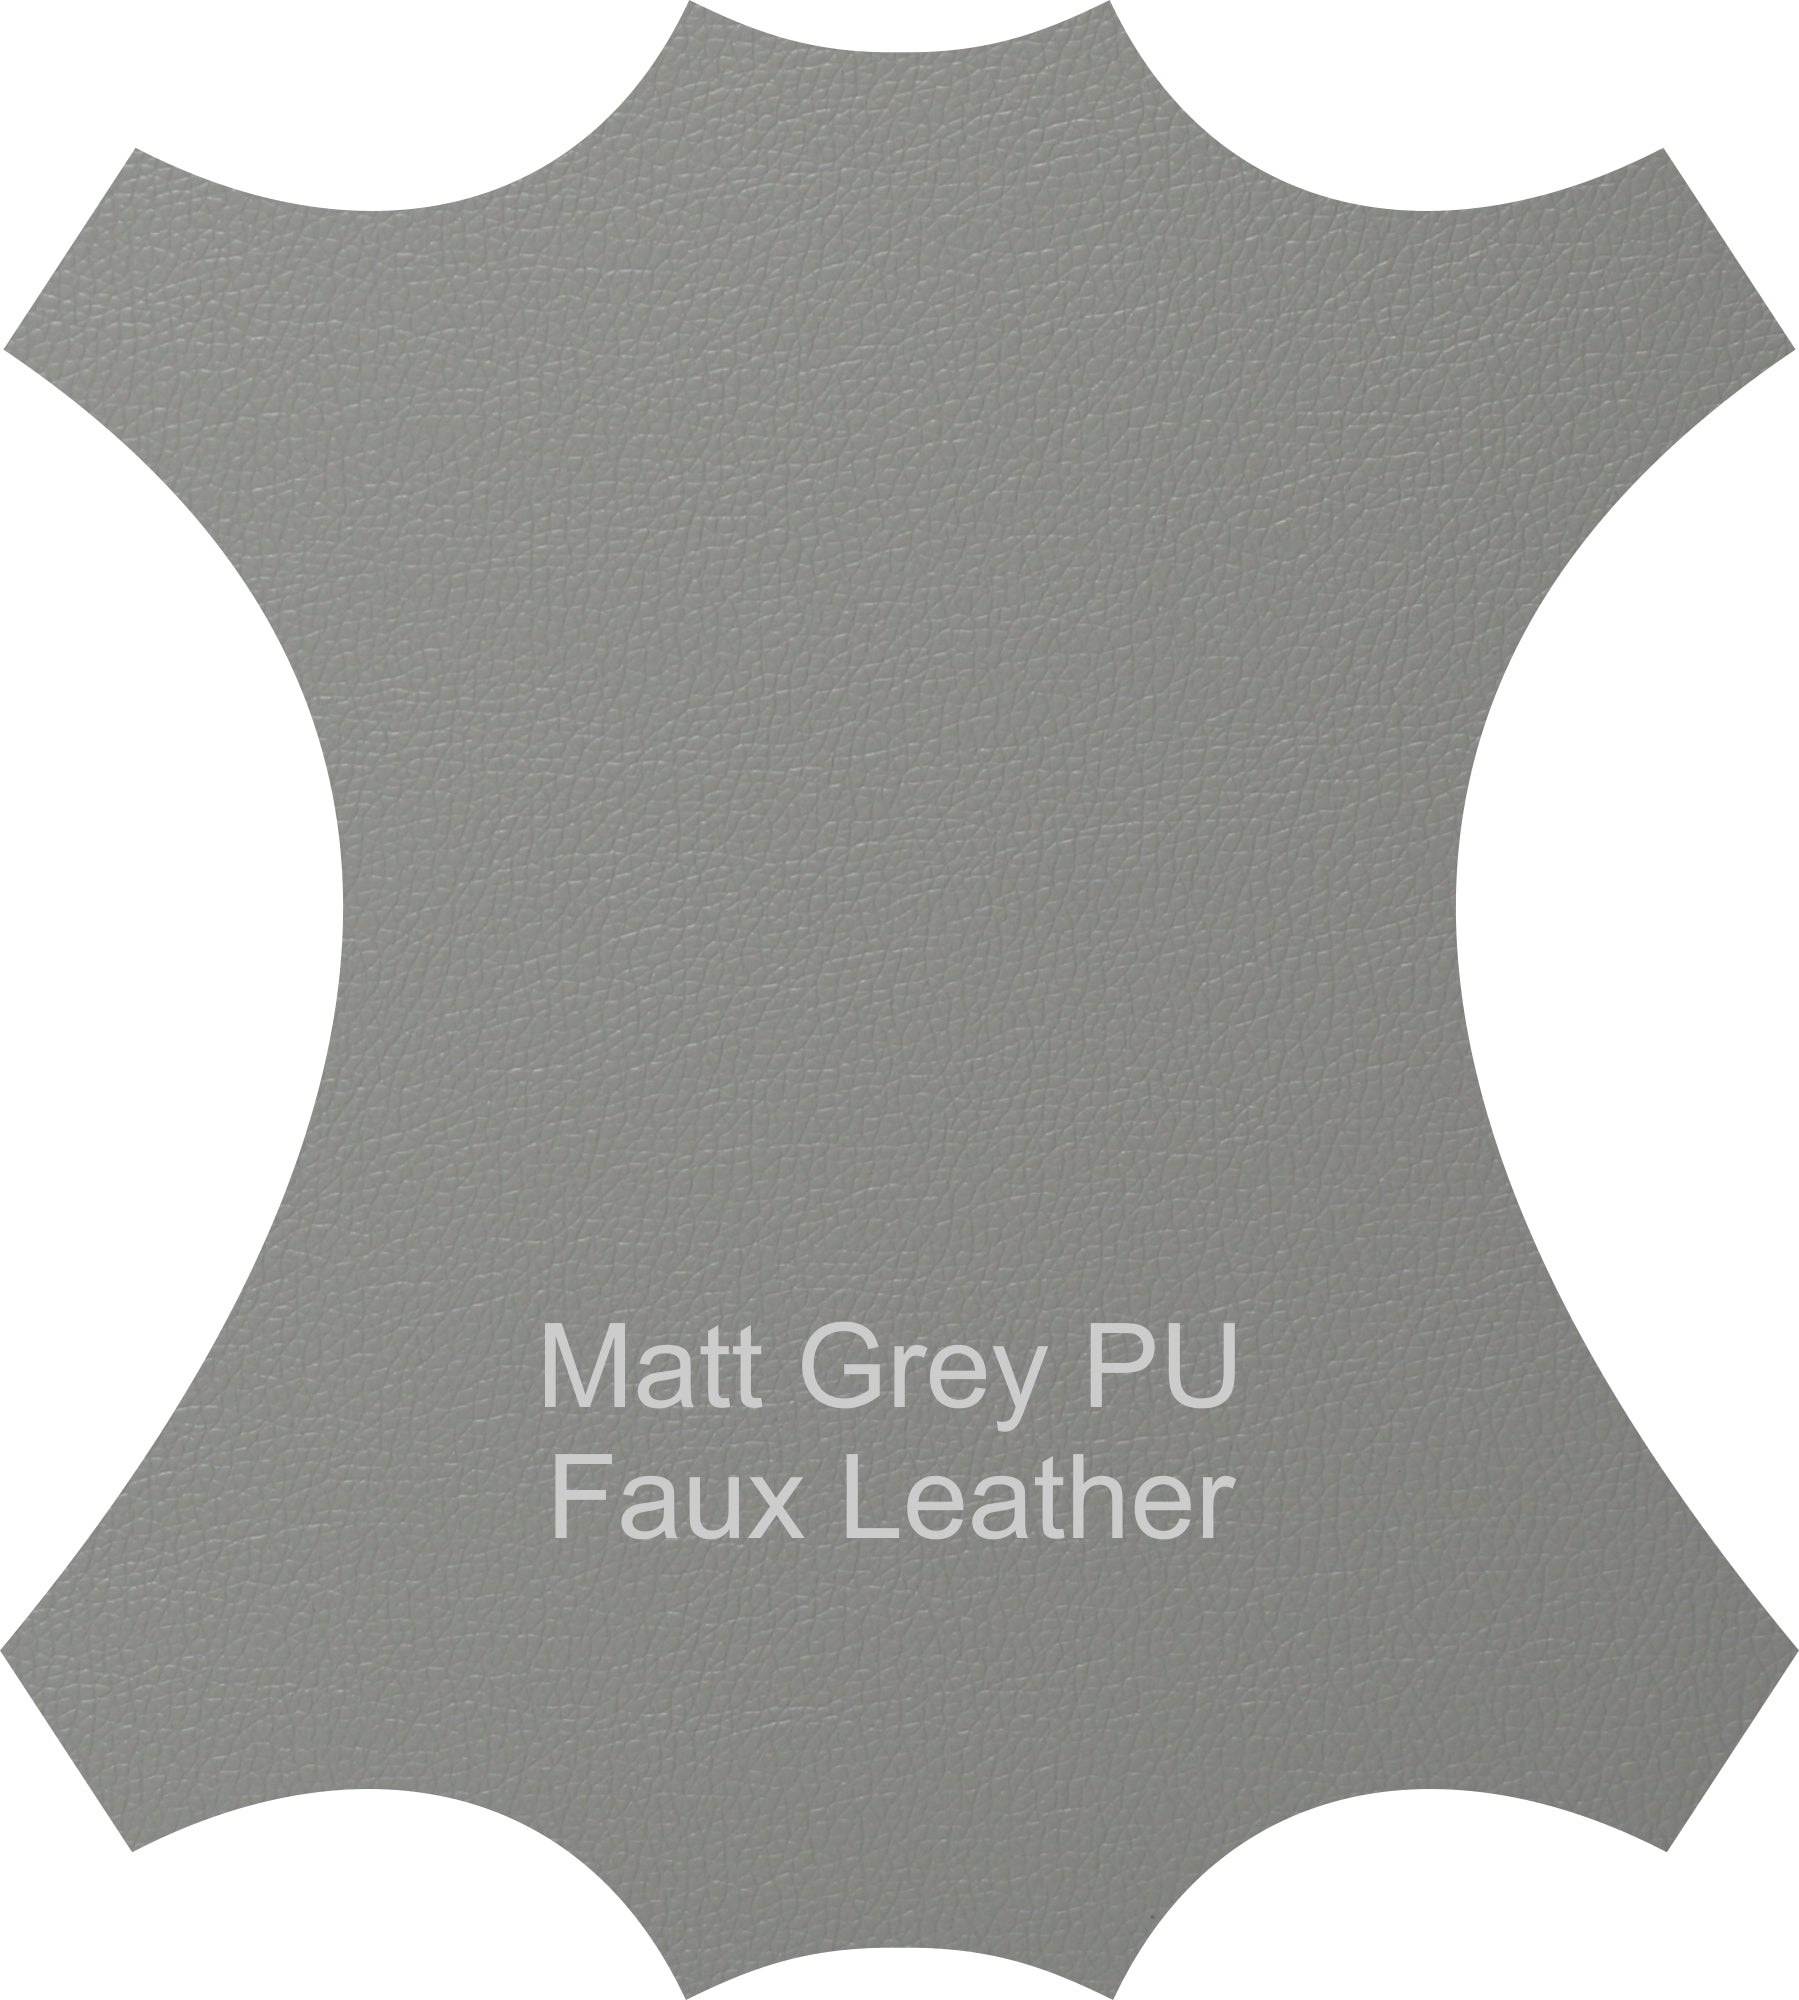 Matt Grey Torino Faux Leather Dining Chairs Swatch